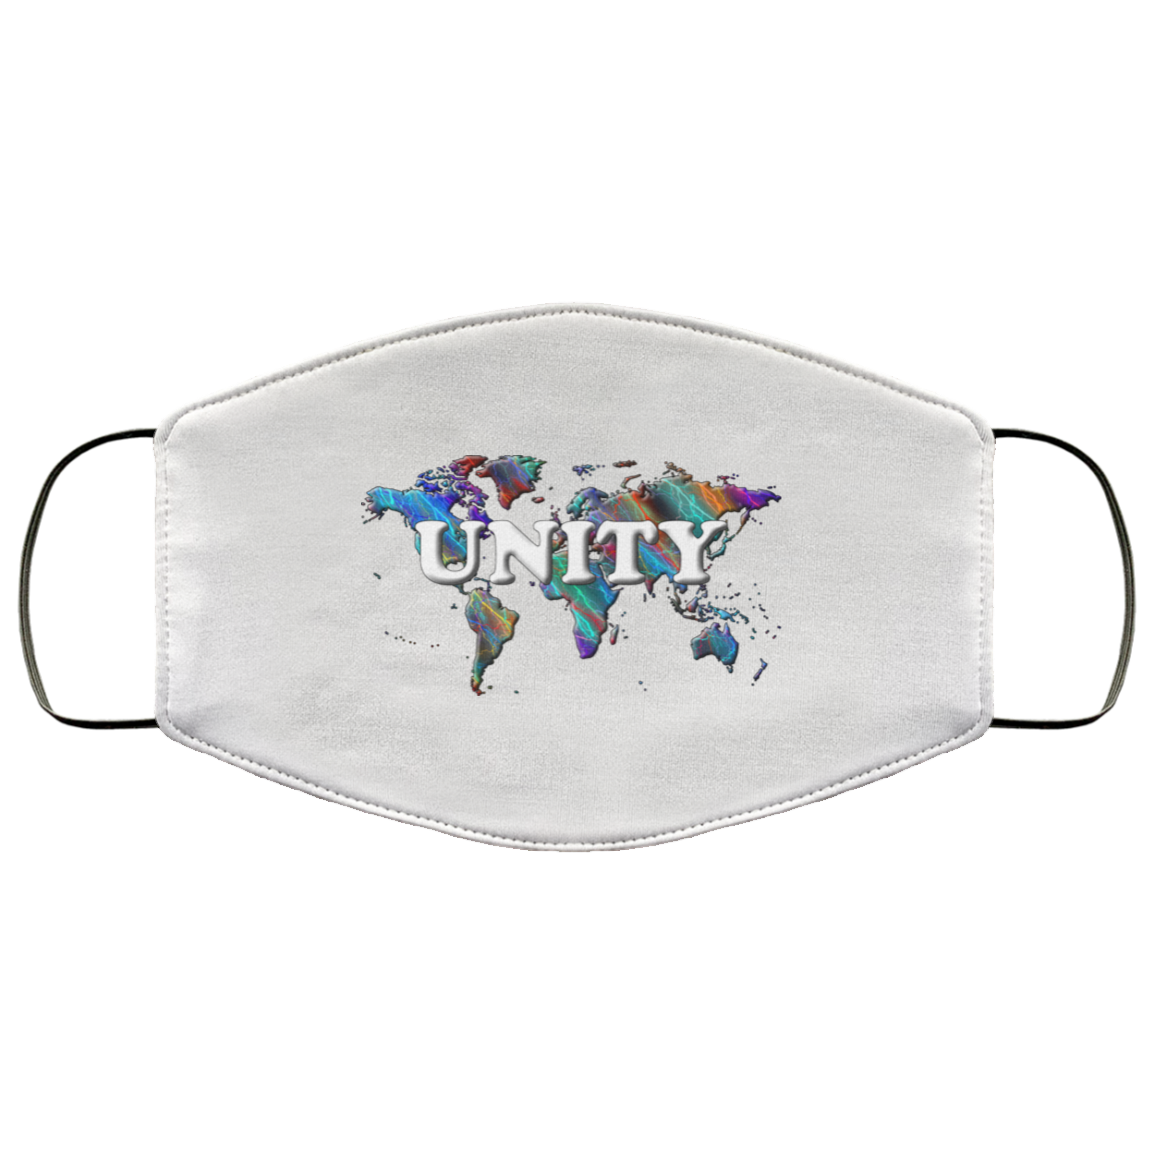 Unity 2 Layer Protective Mask